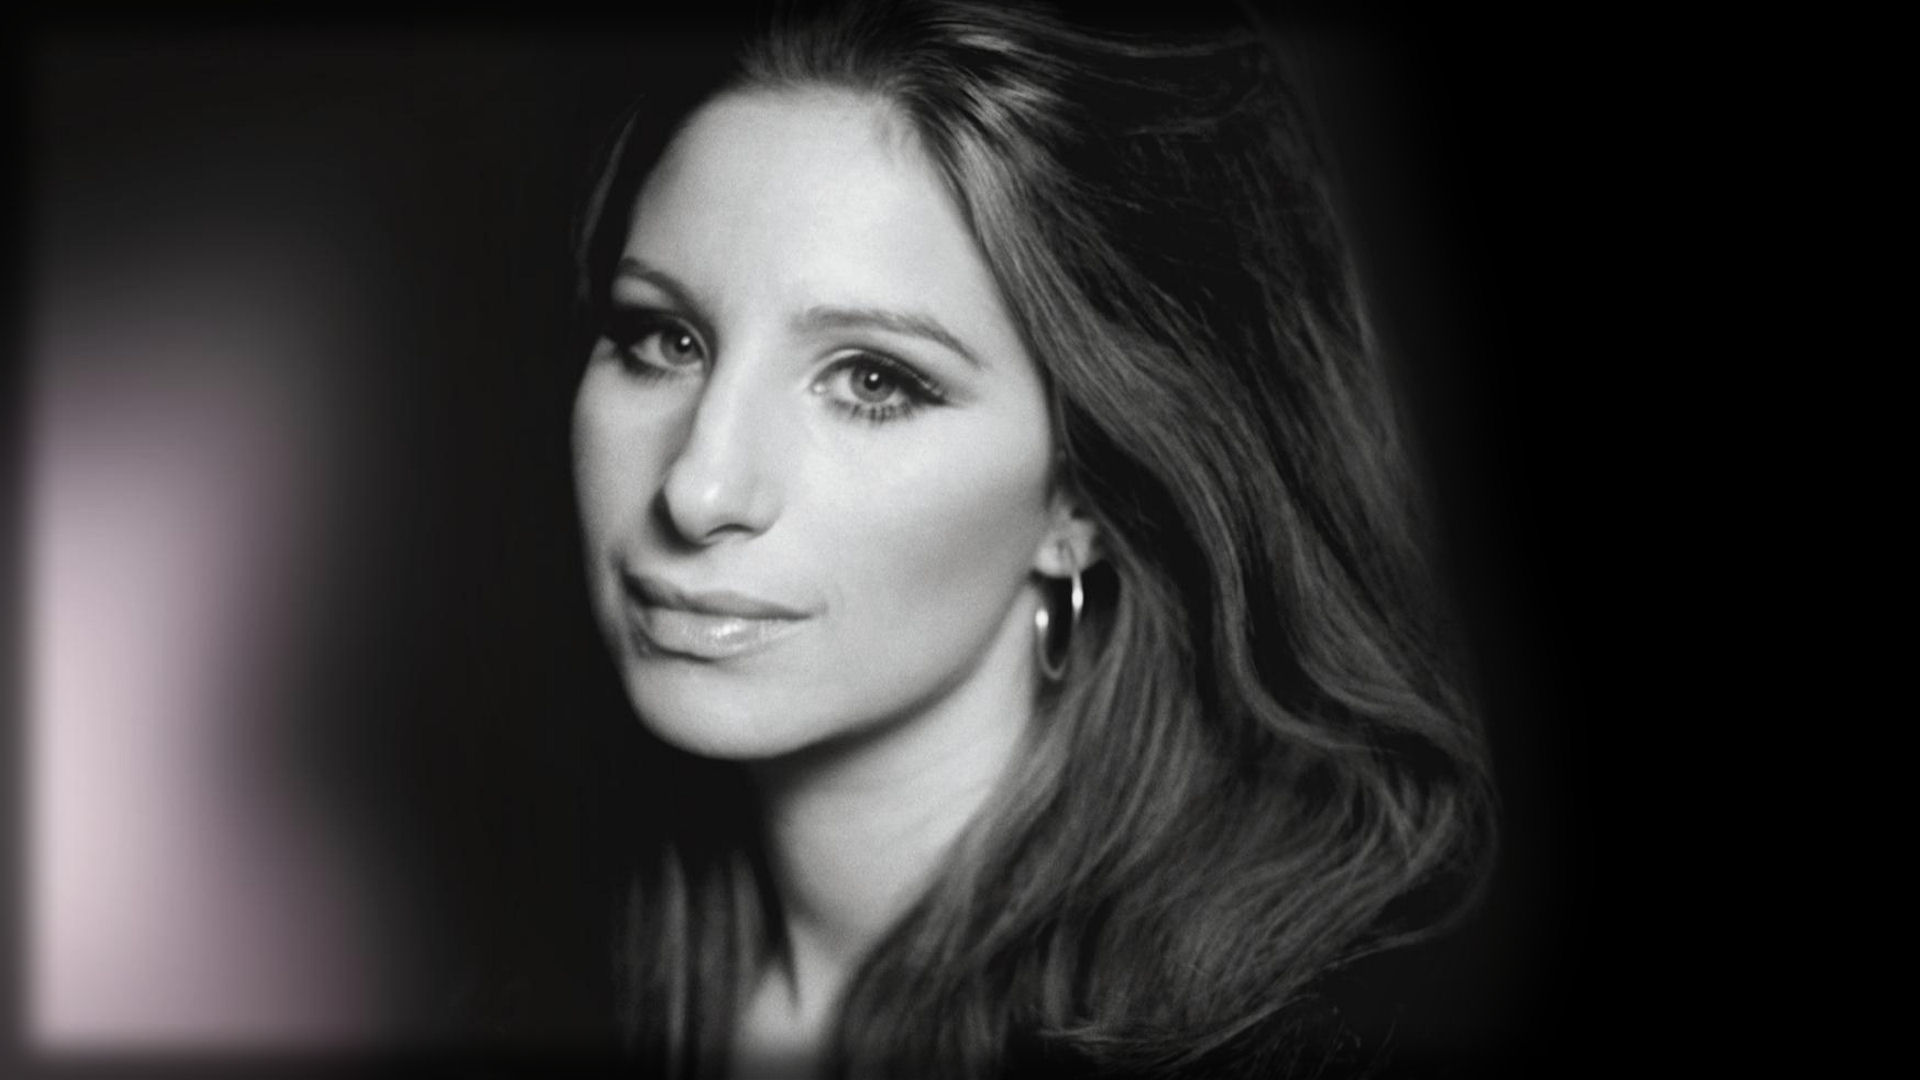 Barbra Streisand Backgrounds, Compatible - PC, Mobile, Gadgets| 1920x1080 px